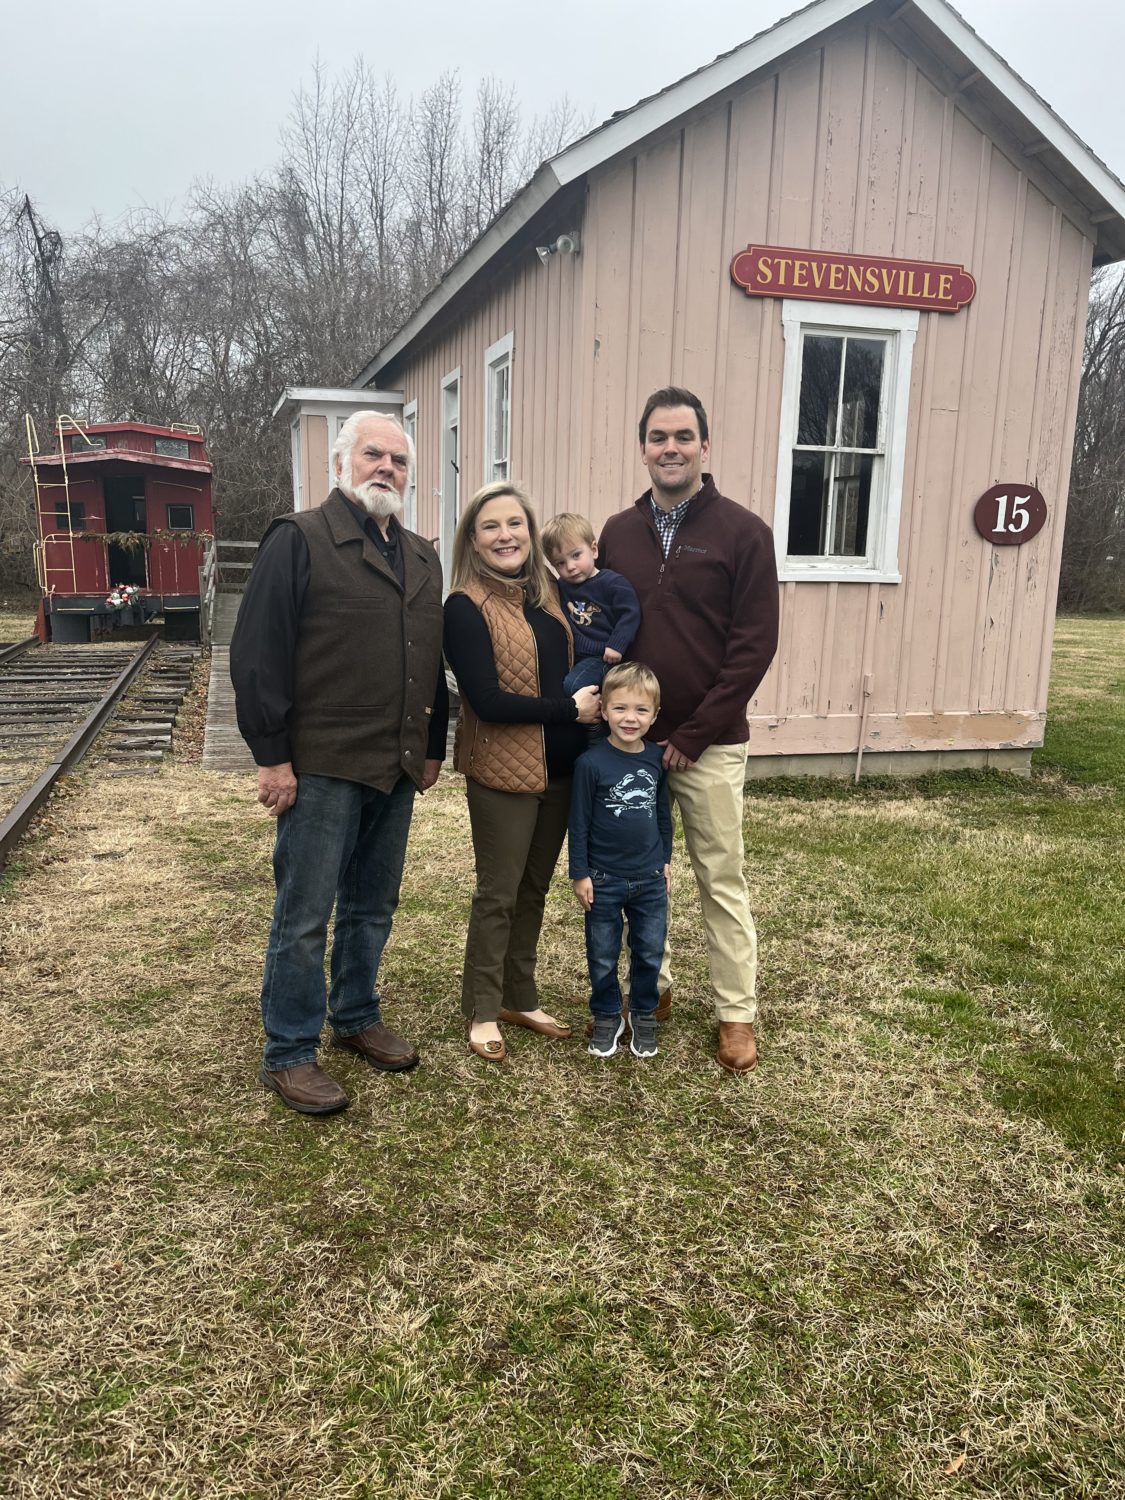 President Jack Broderick with Geoffrey and Ashley MacLeay of the Macleay Family Endowment. The foundation donated $10,000 to help renovate the train station! Thank you! Without the support of the community it would be impossible to adequately maintain our historic buildings!